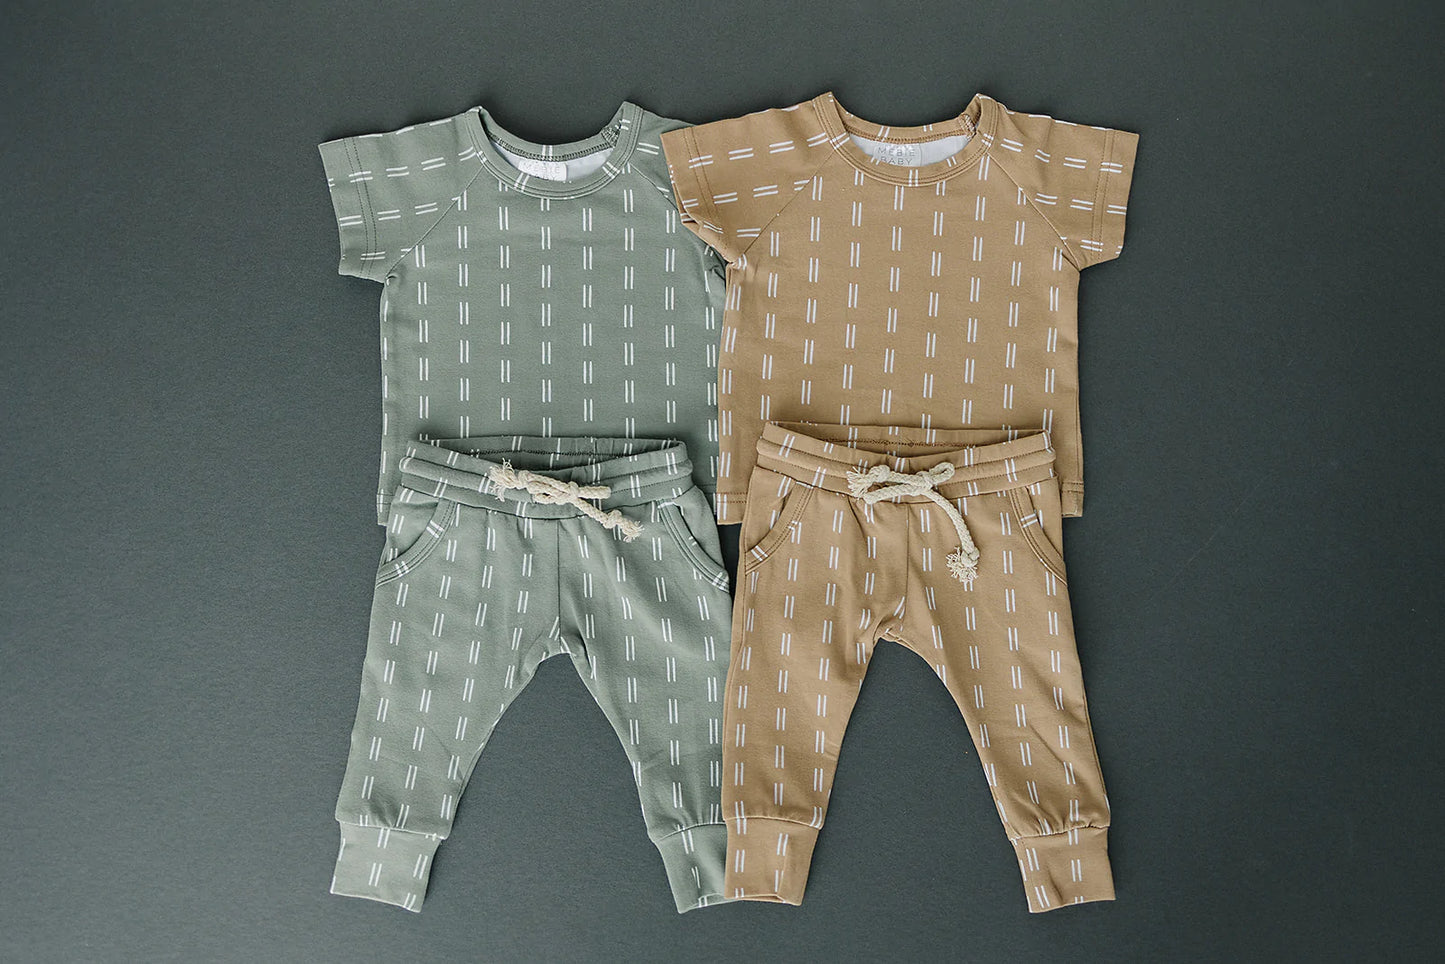 Taupe Checkered Two-Piece Button Set by Mebie Baby 0-3 Months